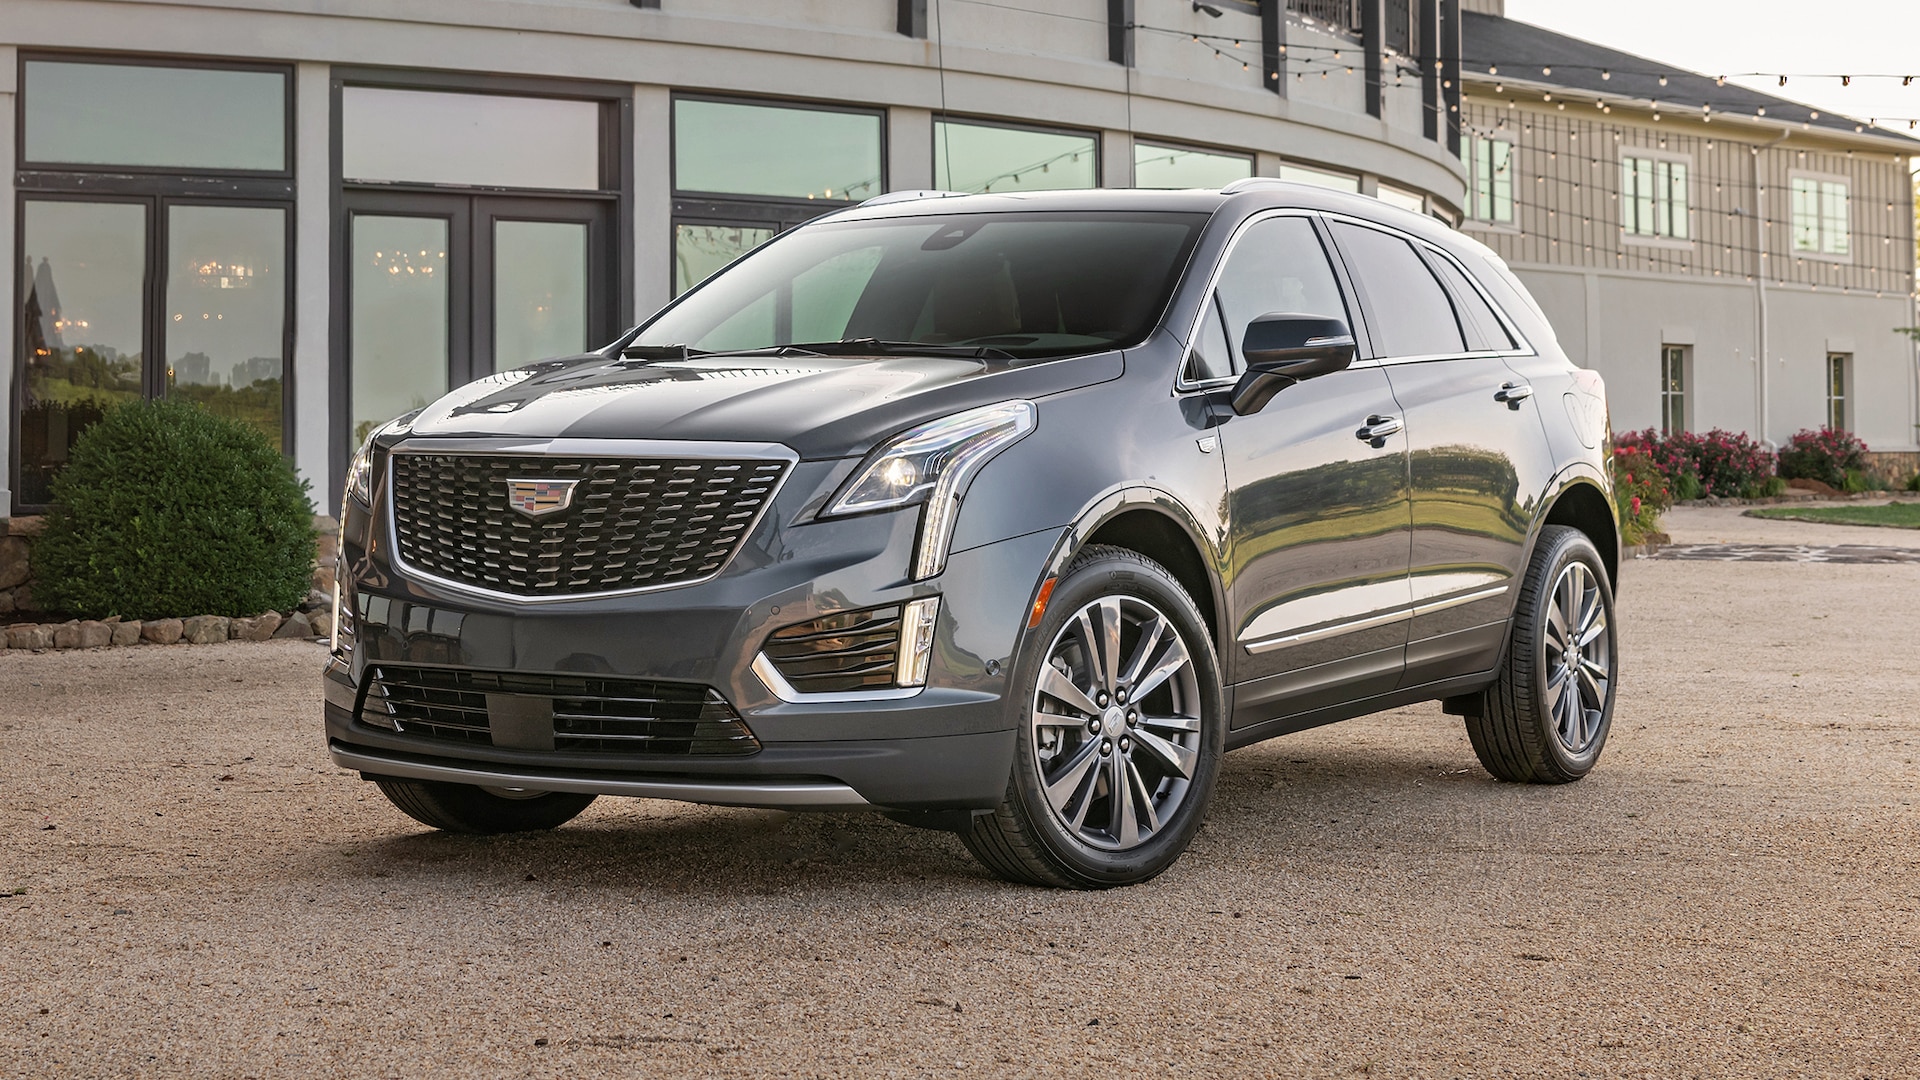 2020 Cadillac XT5: Here's What's New